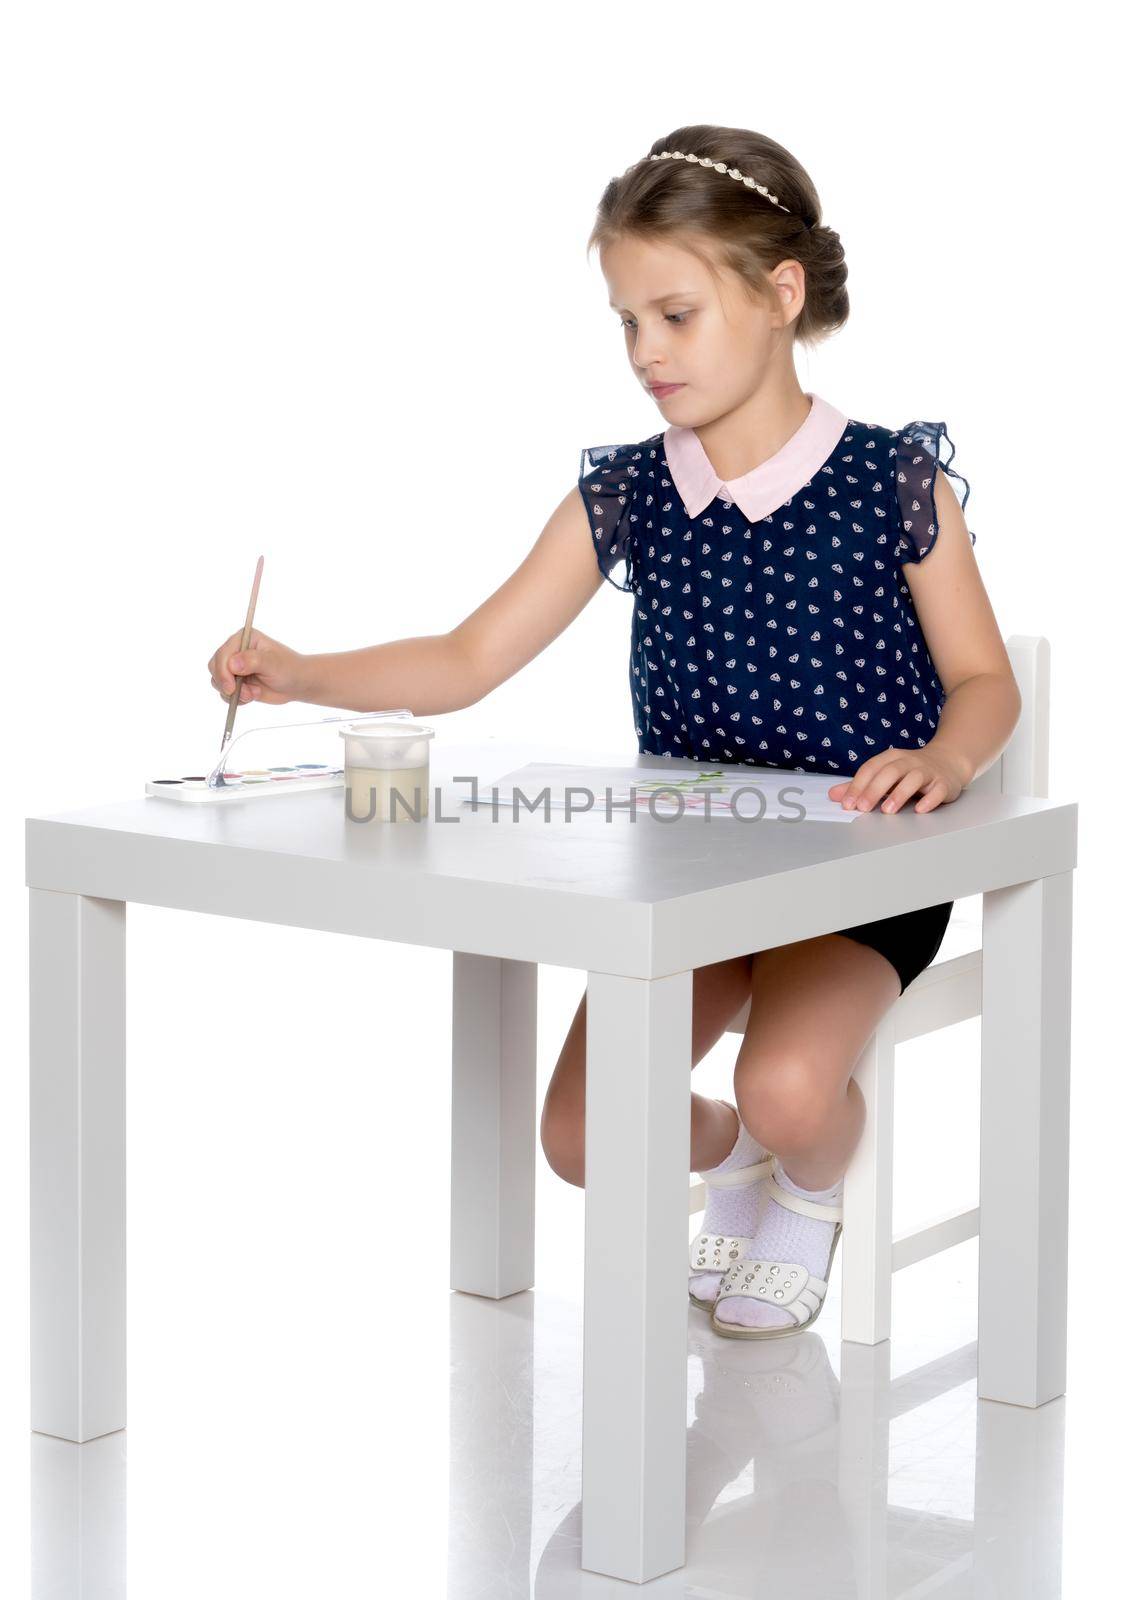 A little girl paints with paint and brush. The concept of children's creativity, happy childhood. Isolated on white background.